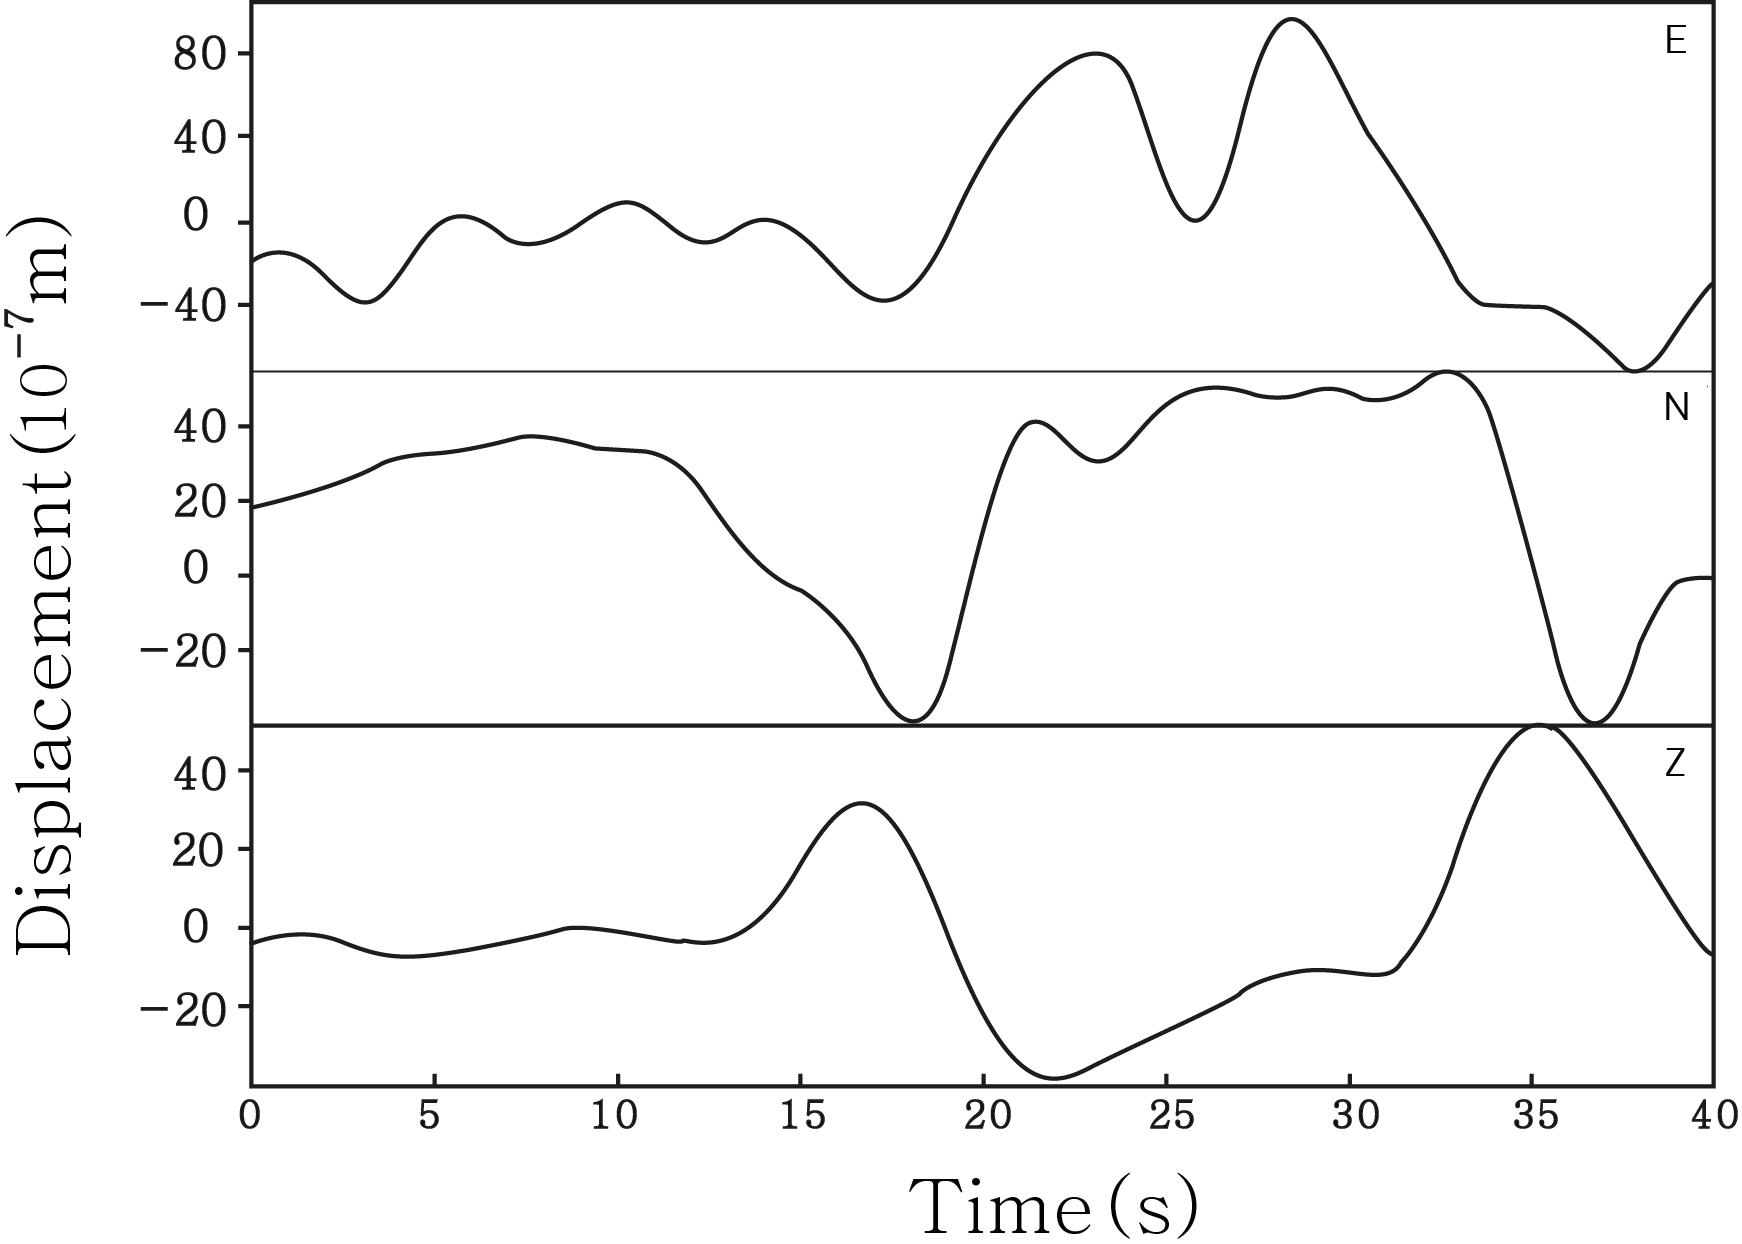 Three bandpass filtered (10-100 s) components of displacement at station WIZ showing the deep-sourced event that preceded surface explosions by approximately four hours. These filtered data were input to moment tensor inversion. The east, north, and downward components are labeled E, N, and Z, respectively.